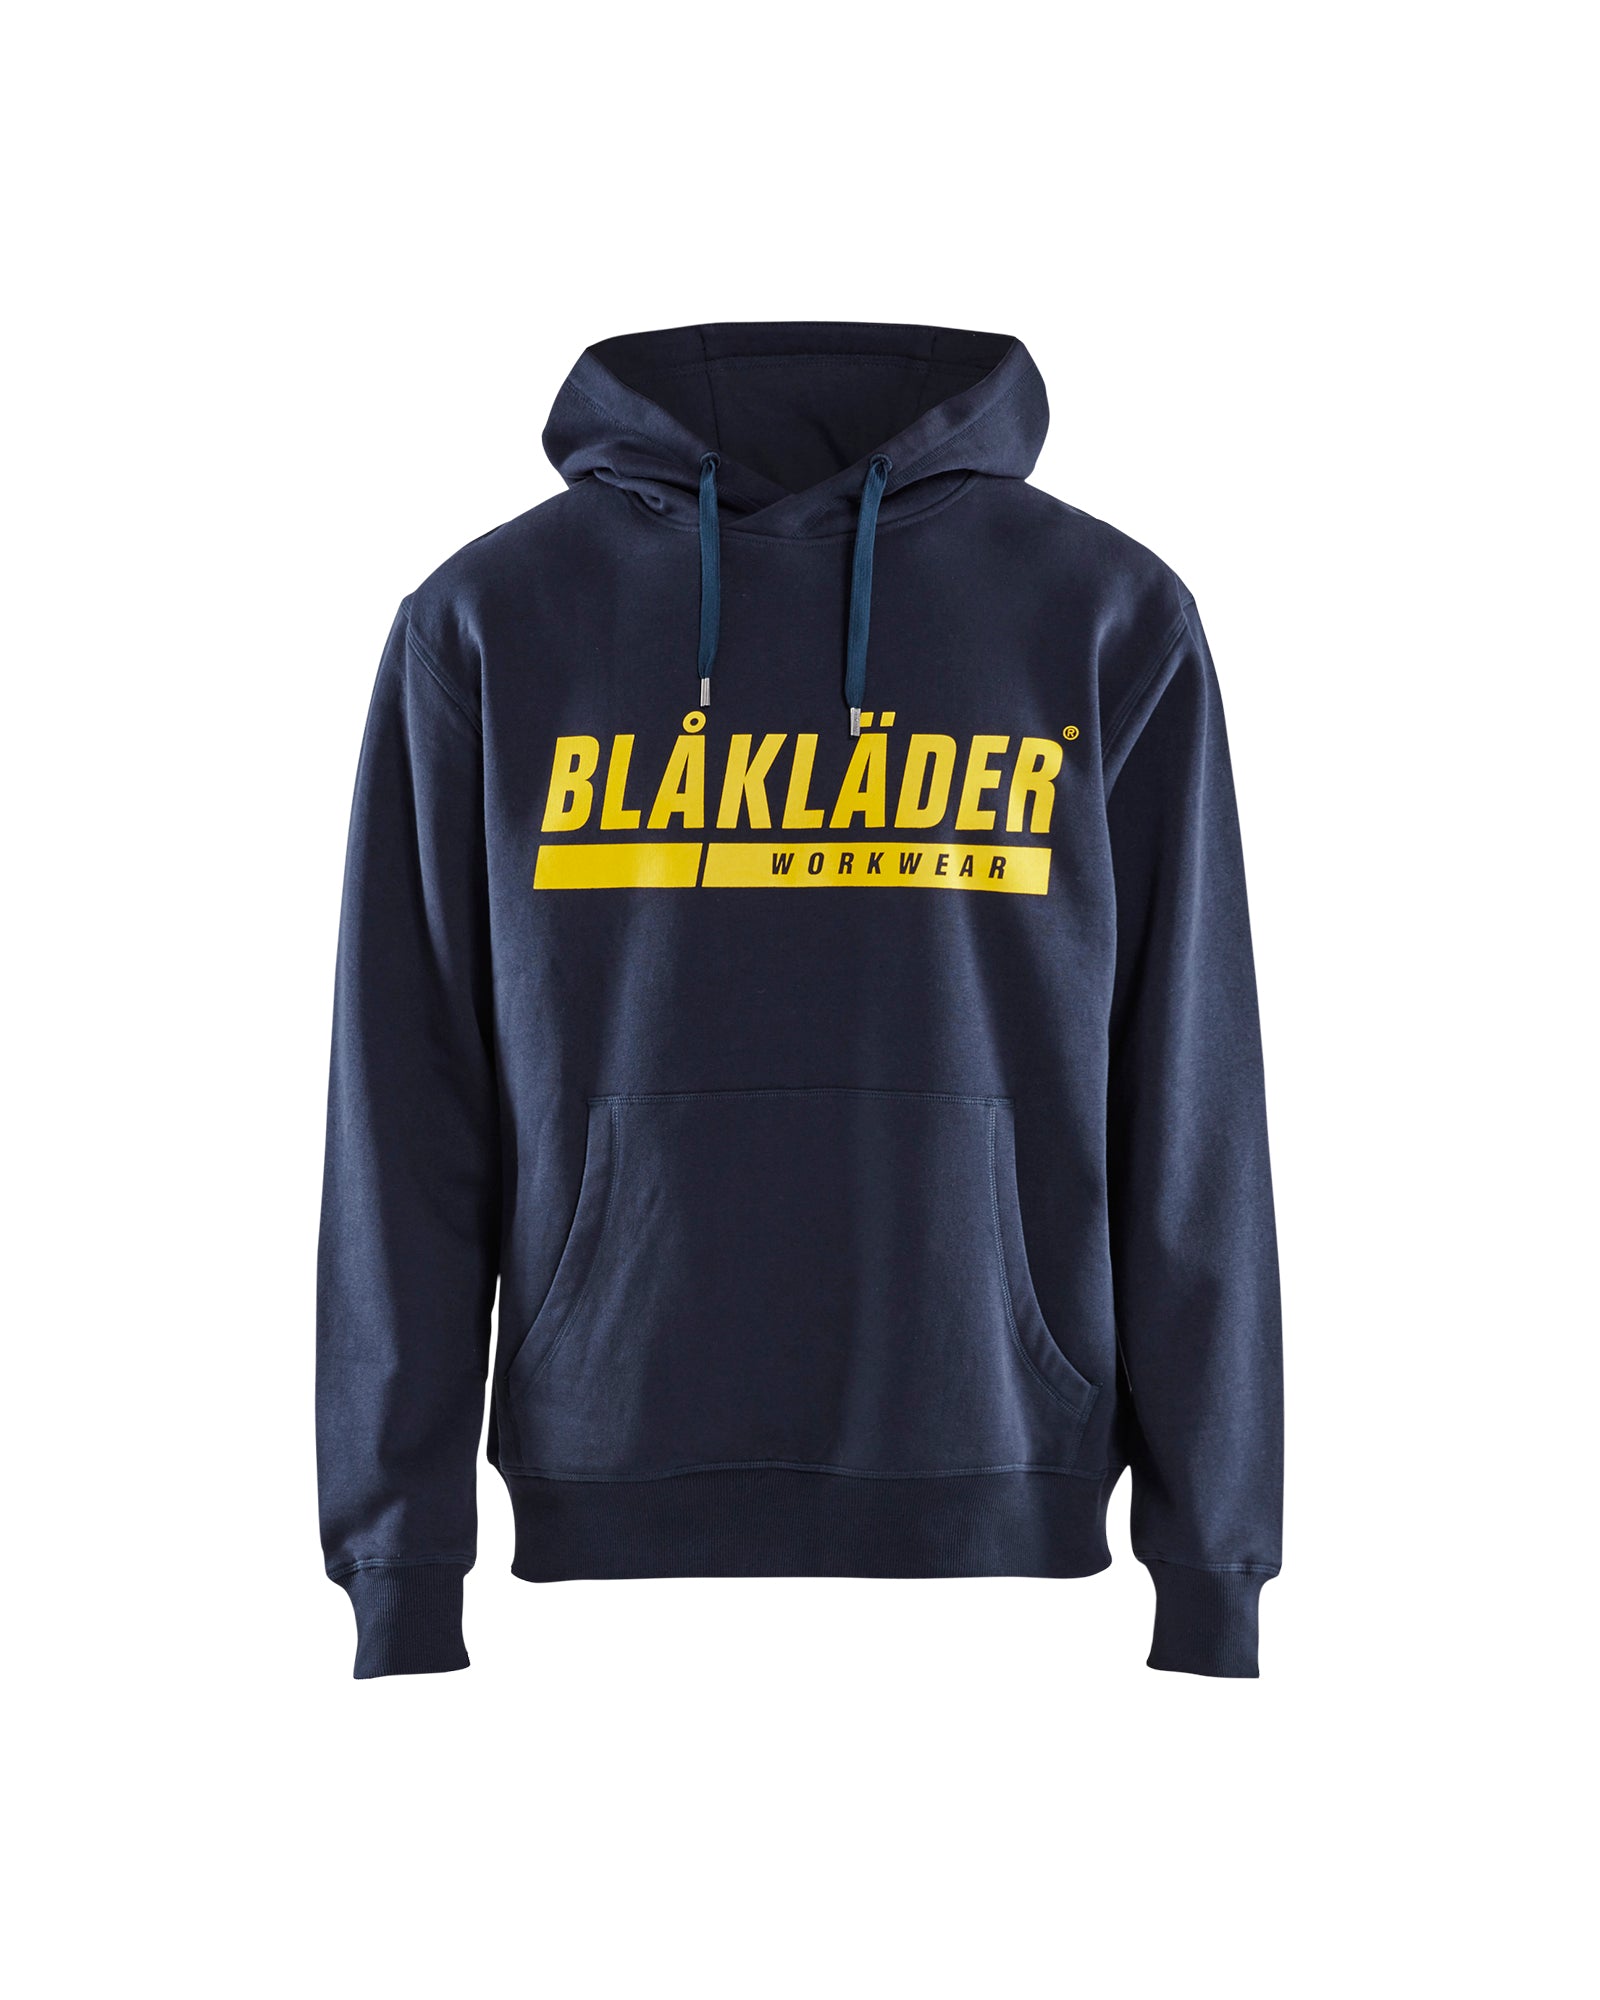 Men's Blaklader Hooded Sweatshirt with Print in Navy Blue Profile from the front